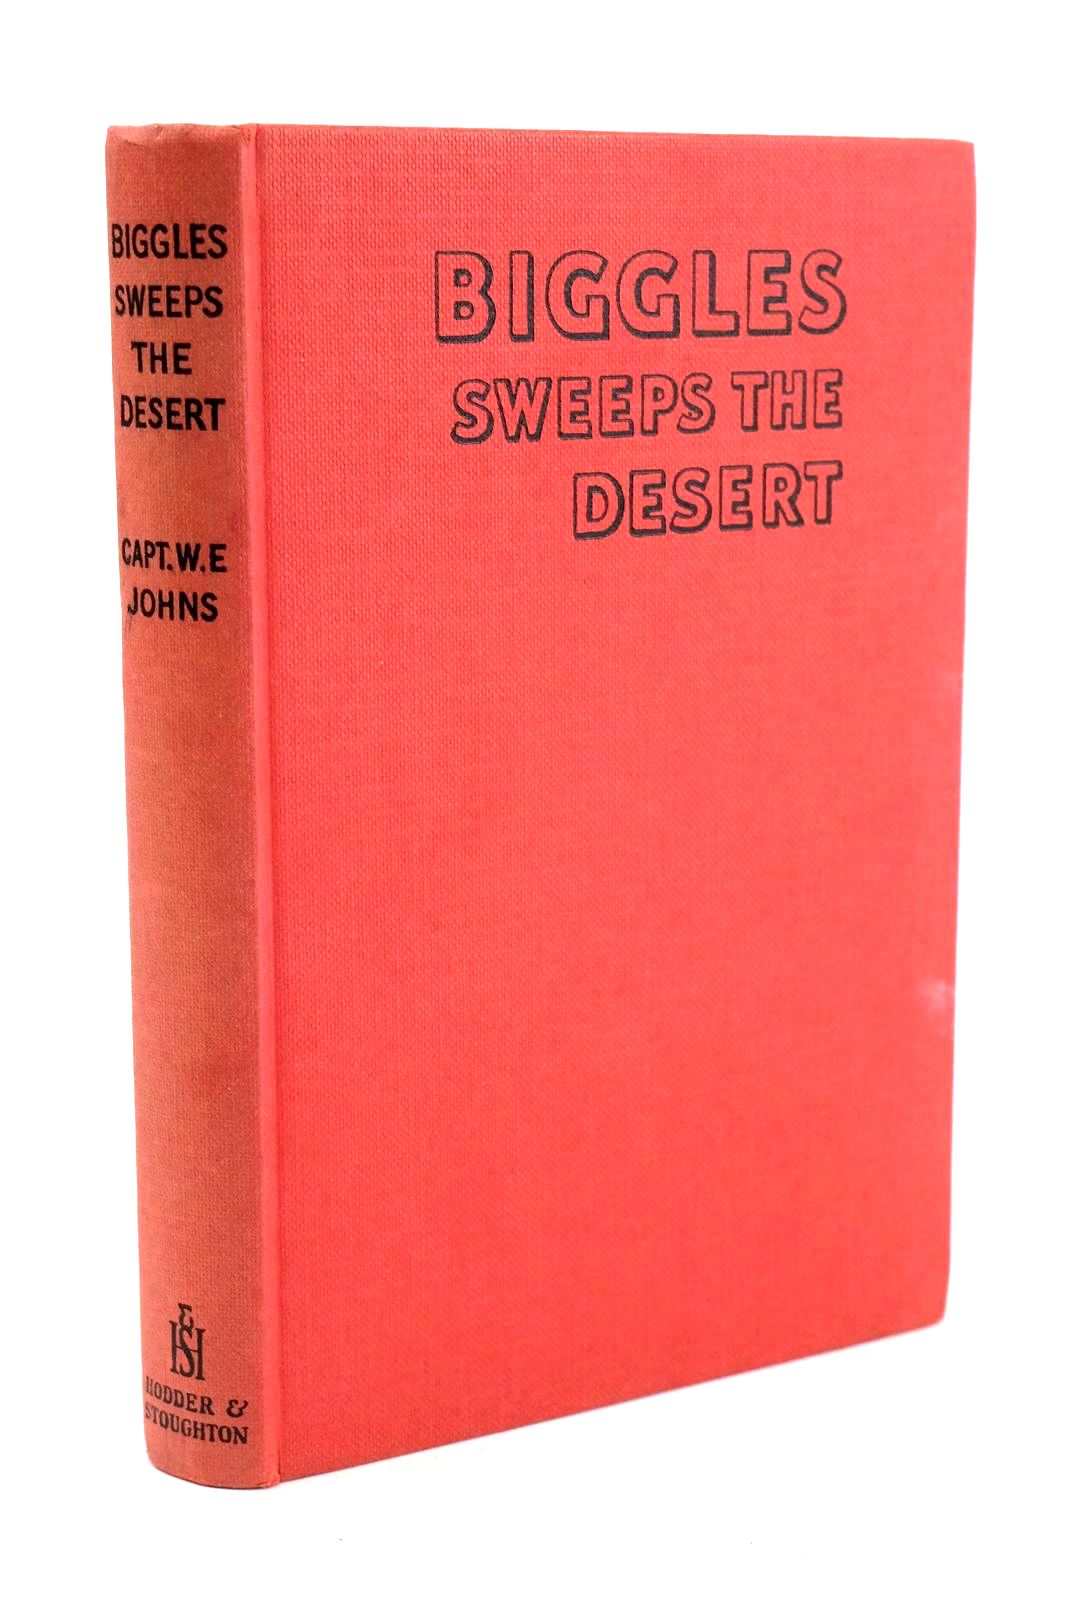 Photo of BIGGLES SWEEPS THE DESERT written by Johns, W.E. illustrated by Stead,  published by Hodder & Stoughton (STOCK CODE: 1324258)  for sale by Stella & Rose's Books